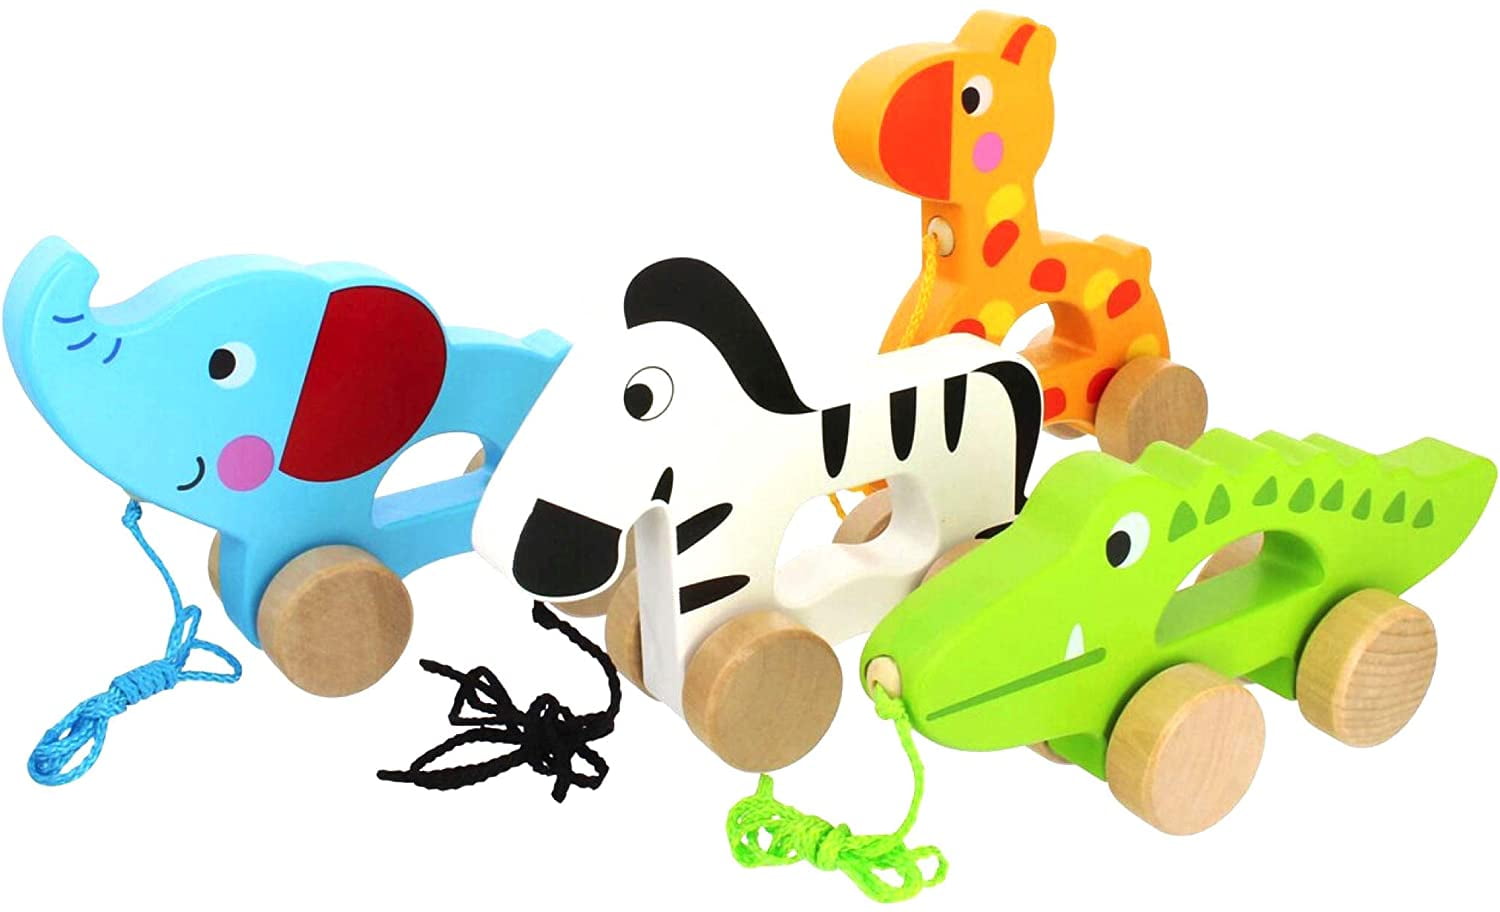 crocodile toys for toddlers